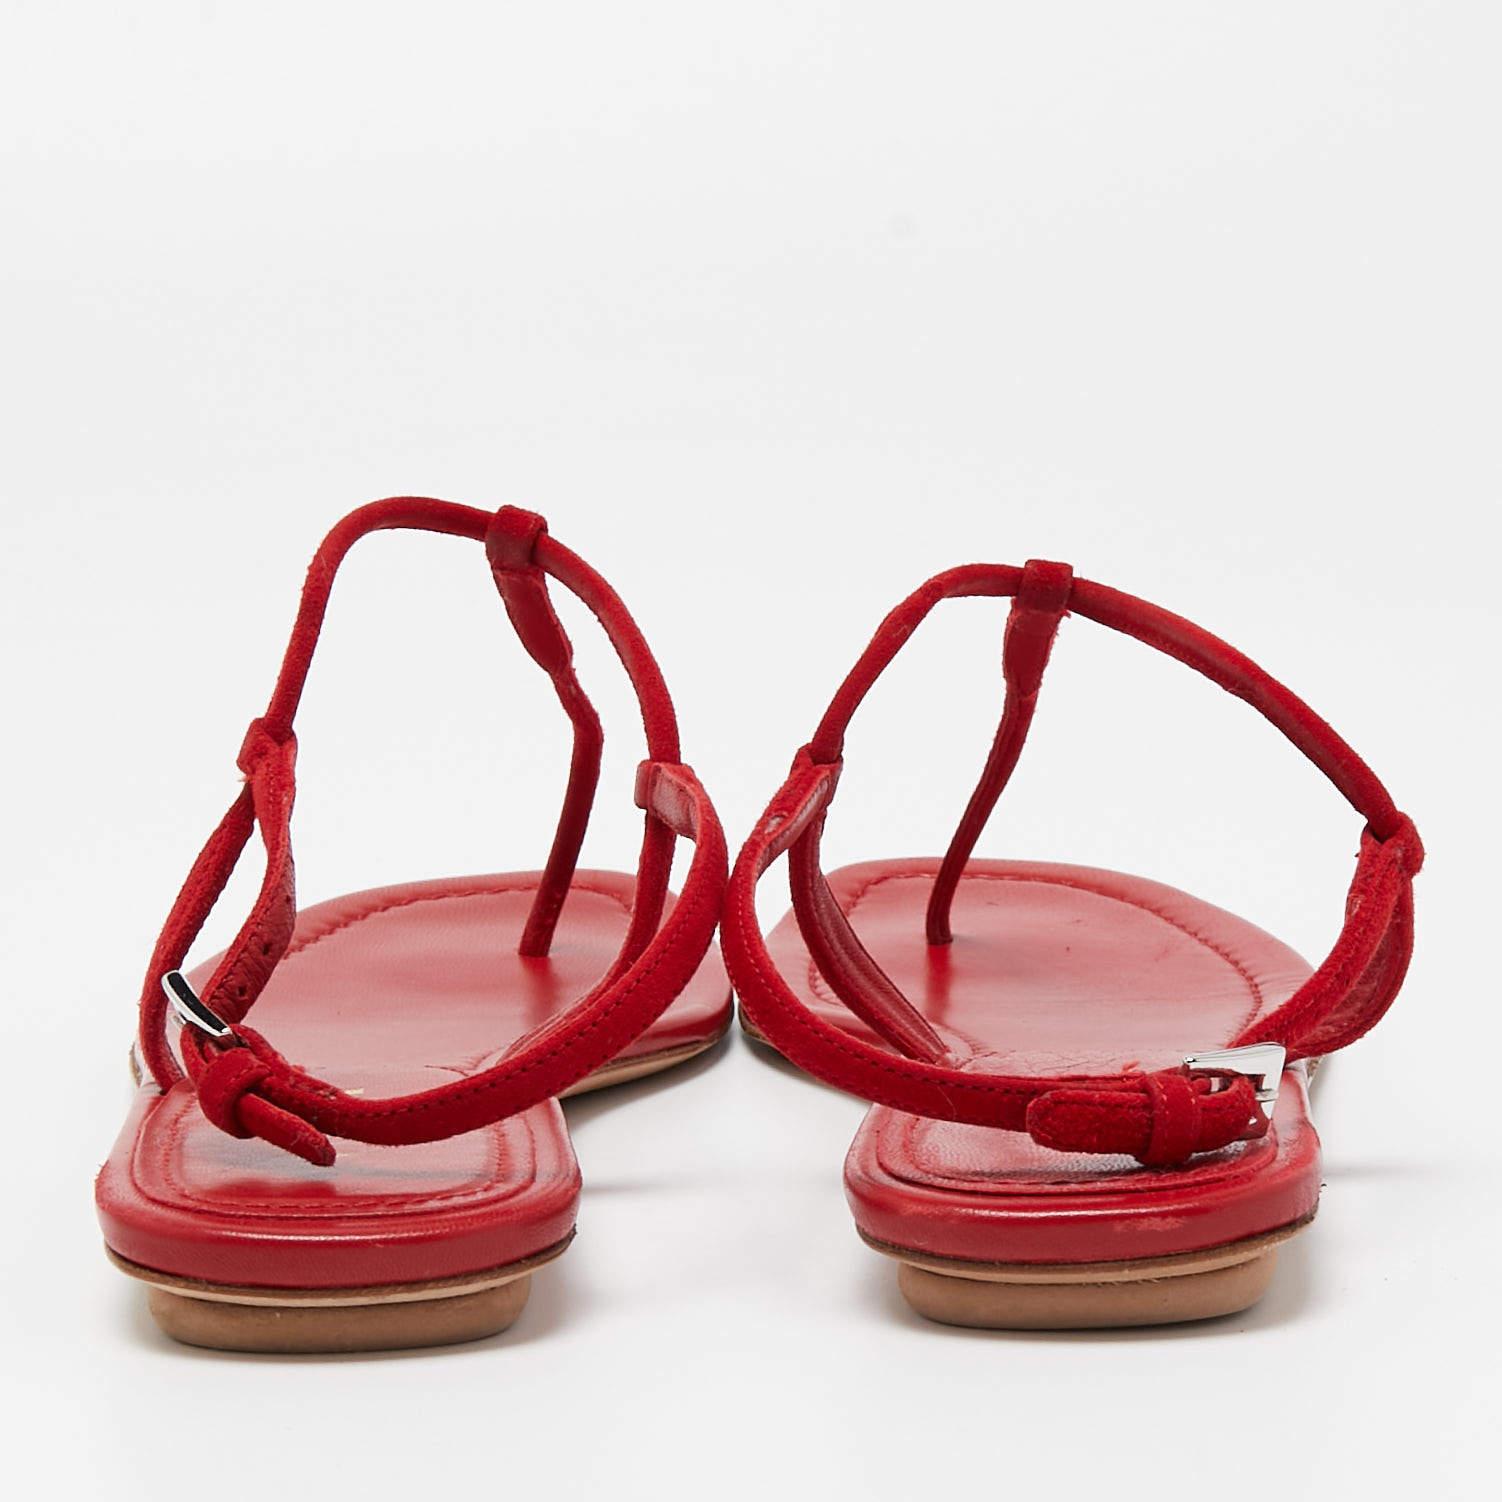 Prada Red Suede Thong Flat Sandals Size 39.5 3